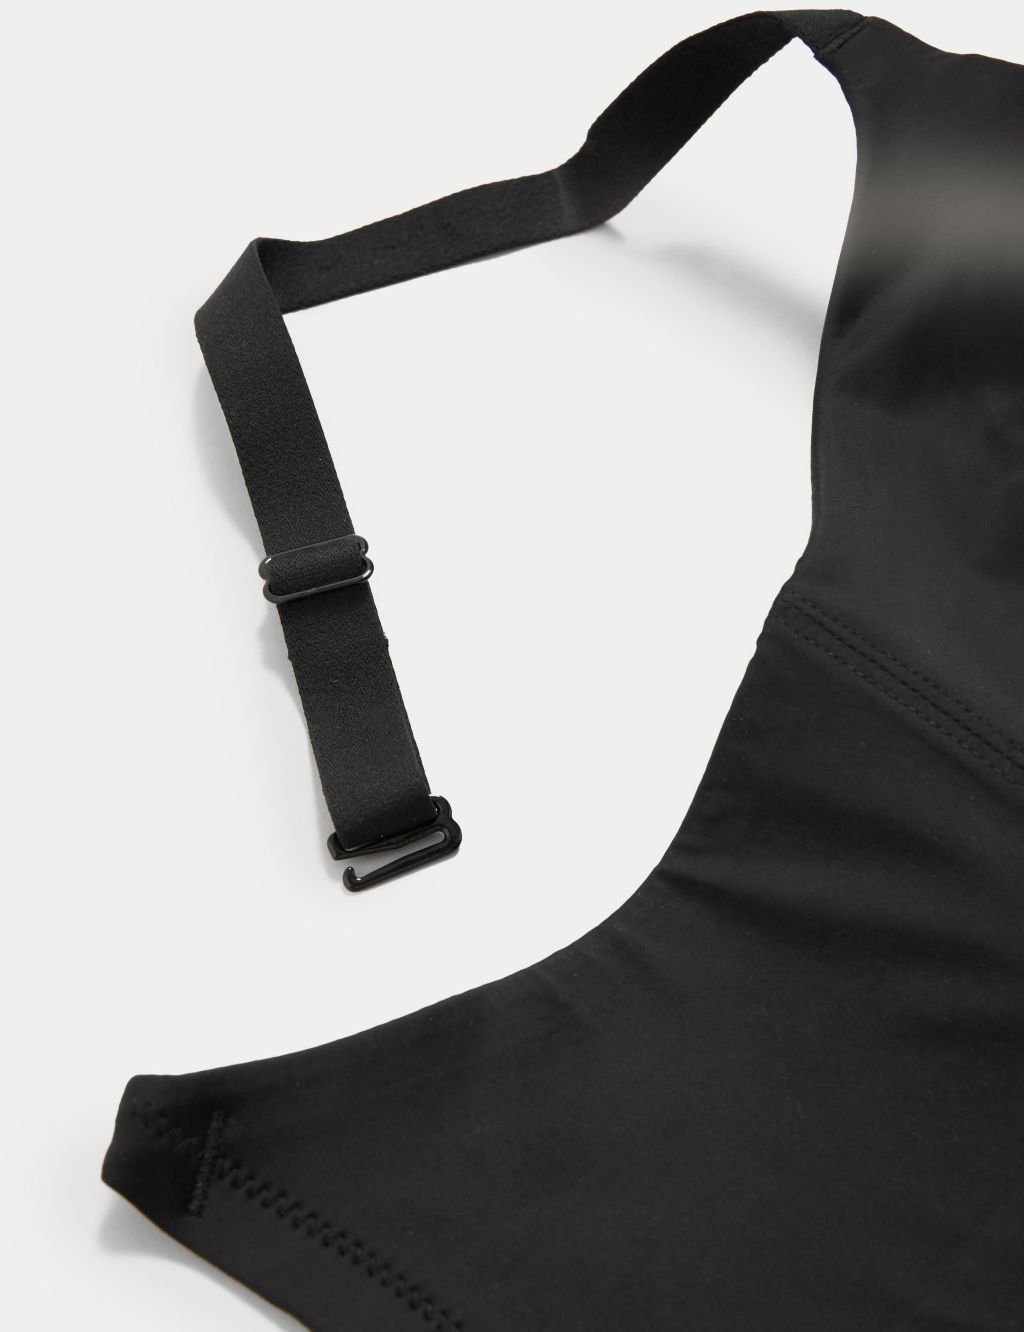 Flexifit™ Non-Wired Full Cup Bra F-H image 6